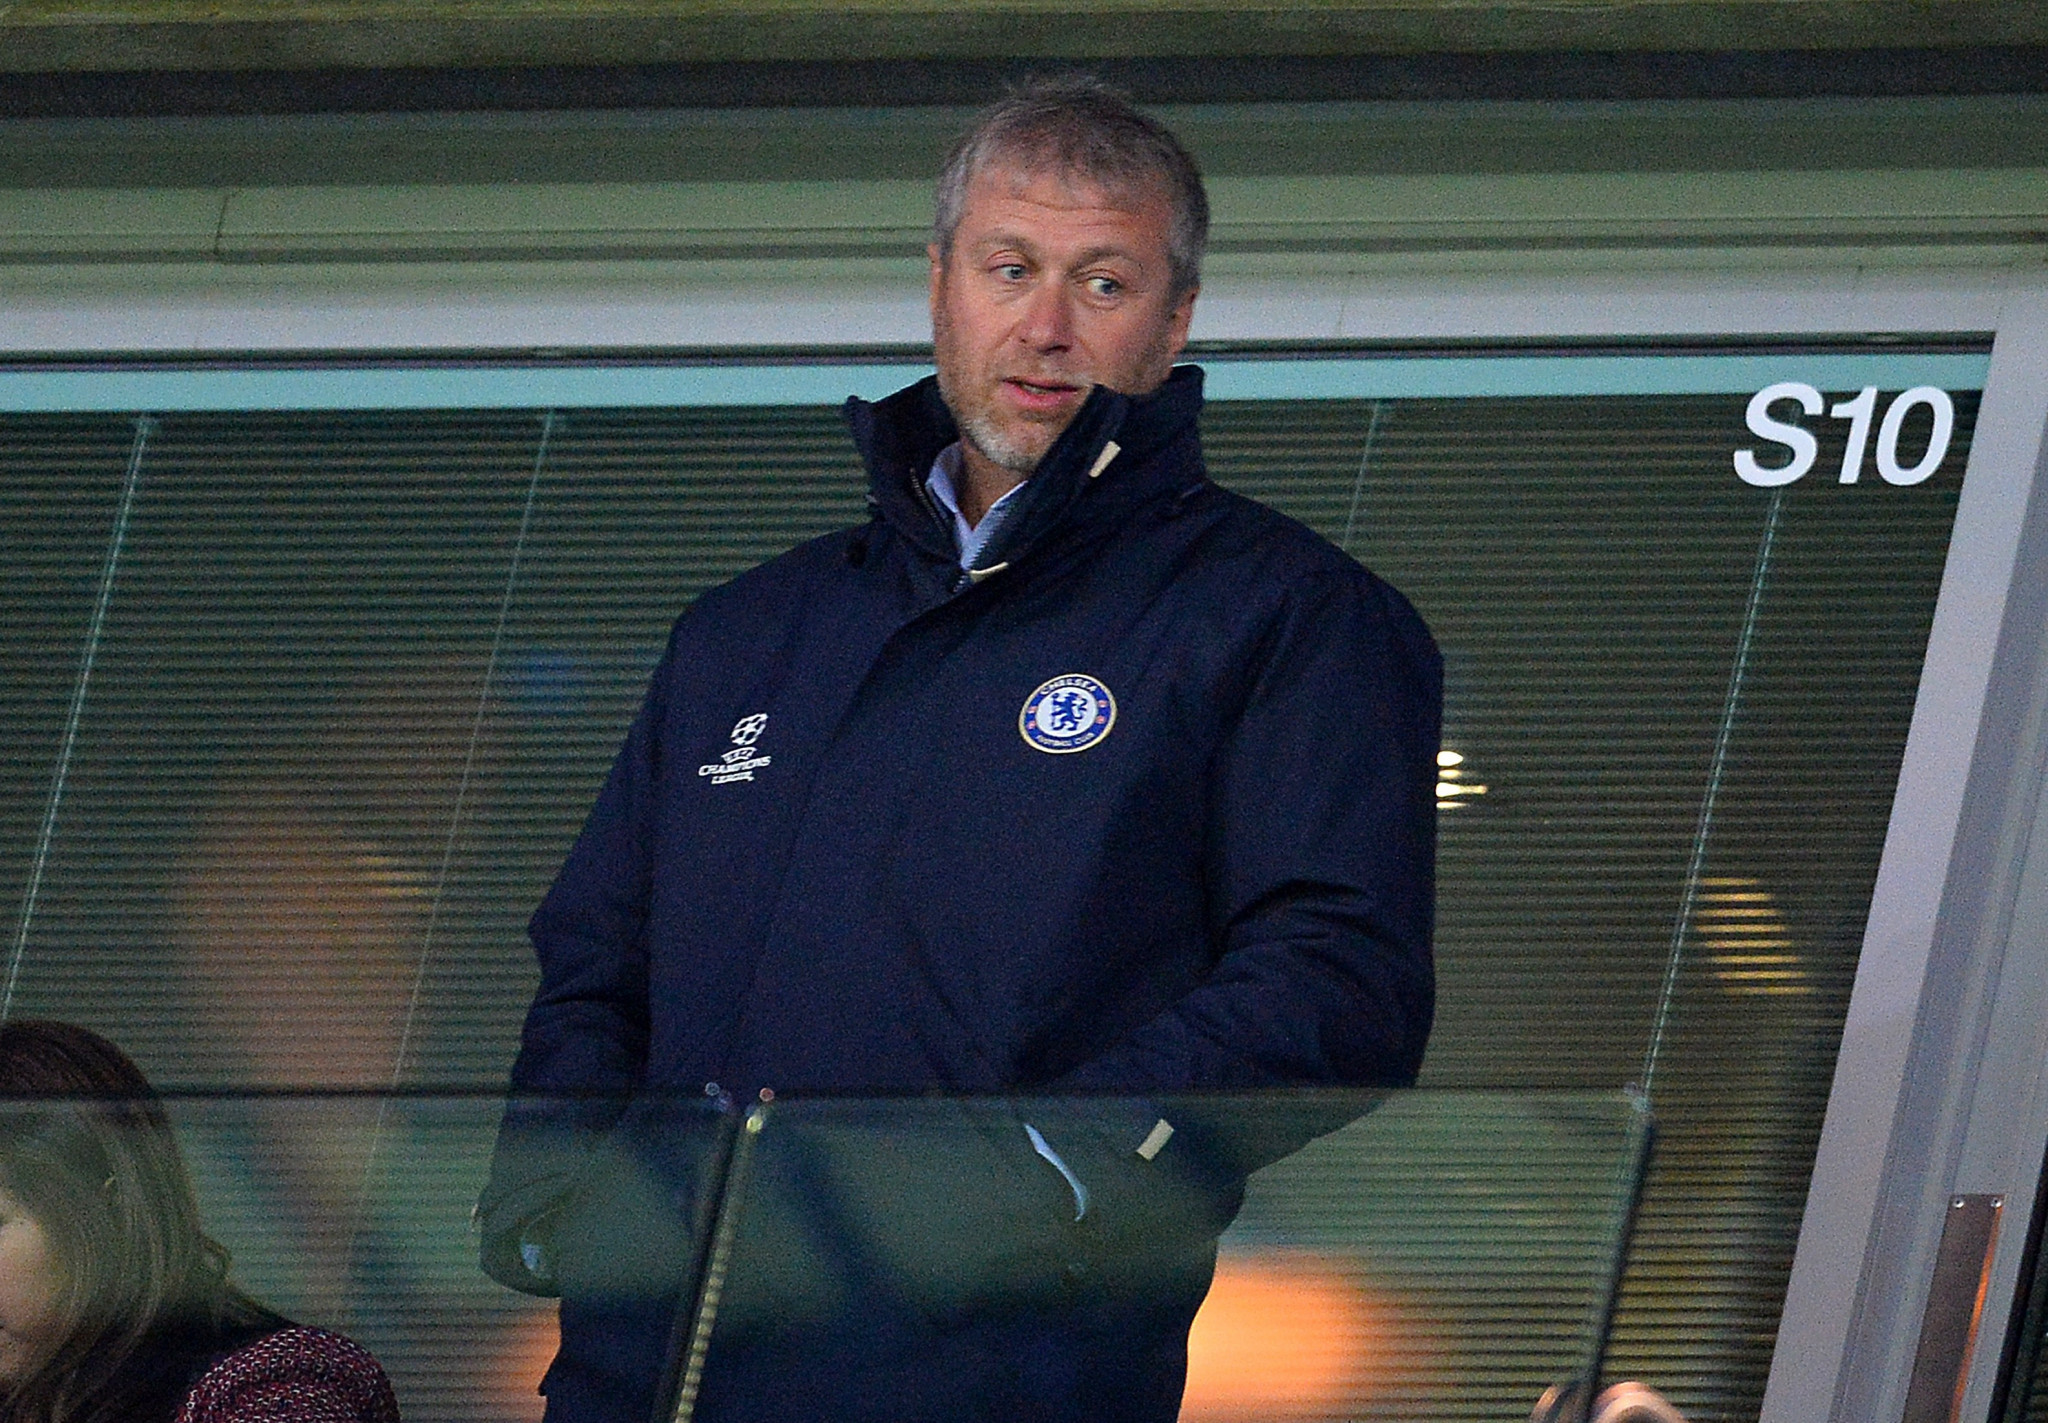 Chelsea Football Club owner Roman Abramovich has been sanctioned by the UK Government ©Getty Images